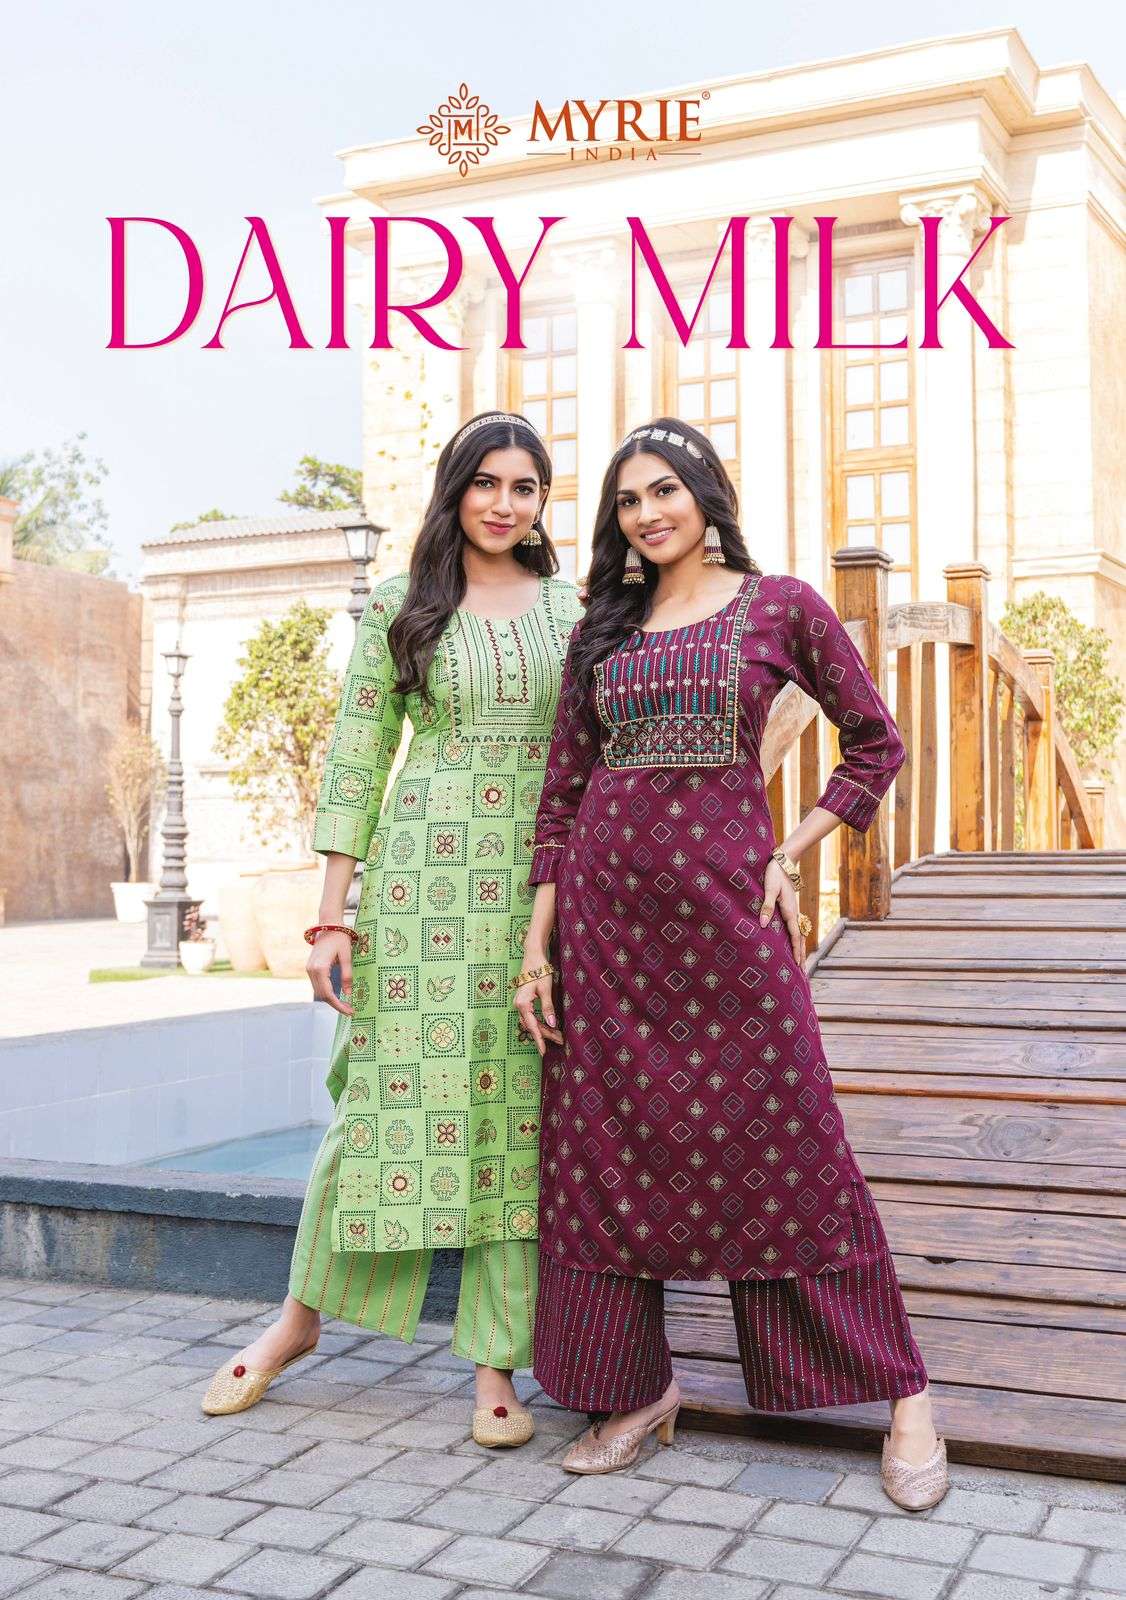 DAIRY MILK BY MAYRIE INDIA PRESENTING NEW HEAVY FANCY DESIGNER HEAVY RAYON PRINT EMBRODIERY WORK KURTI WITH PLAZO FESTIVAL WEAR COLLECTION WHOLESALER